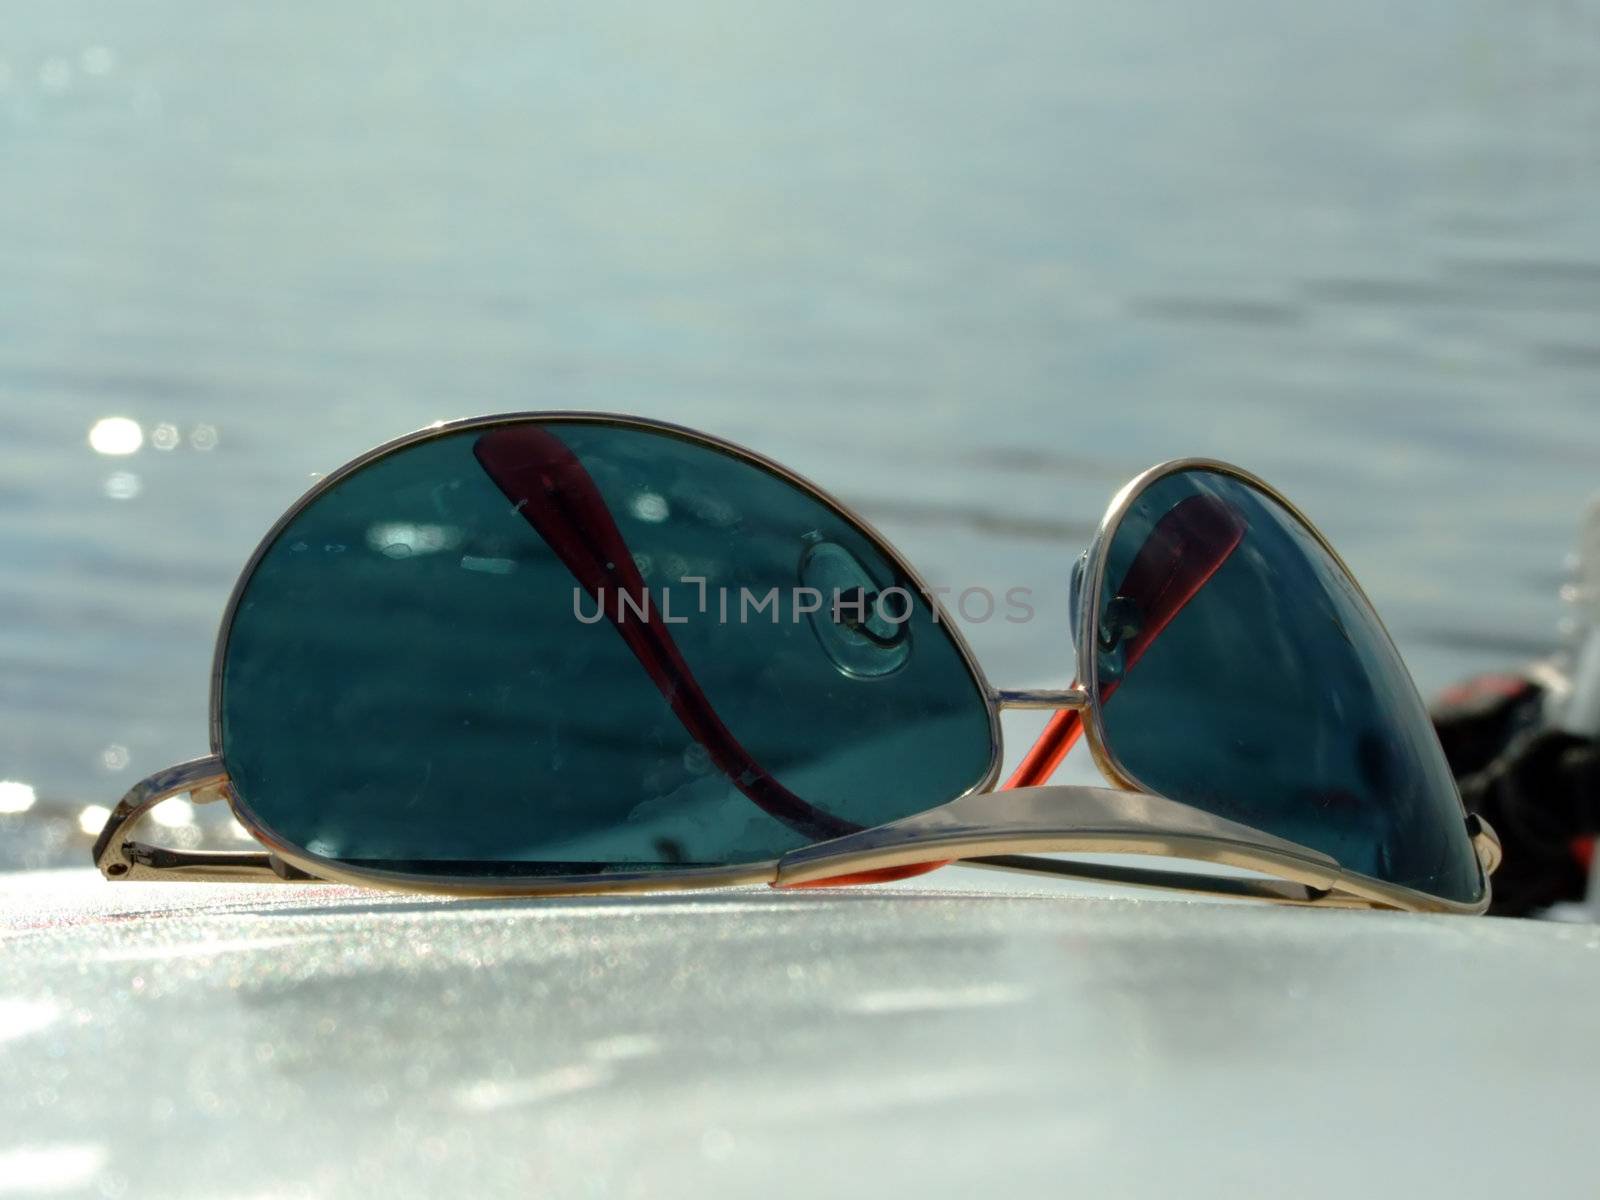 The sunglasses laying on a white surface on a background of water